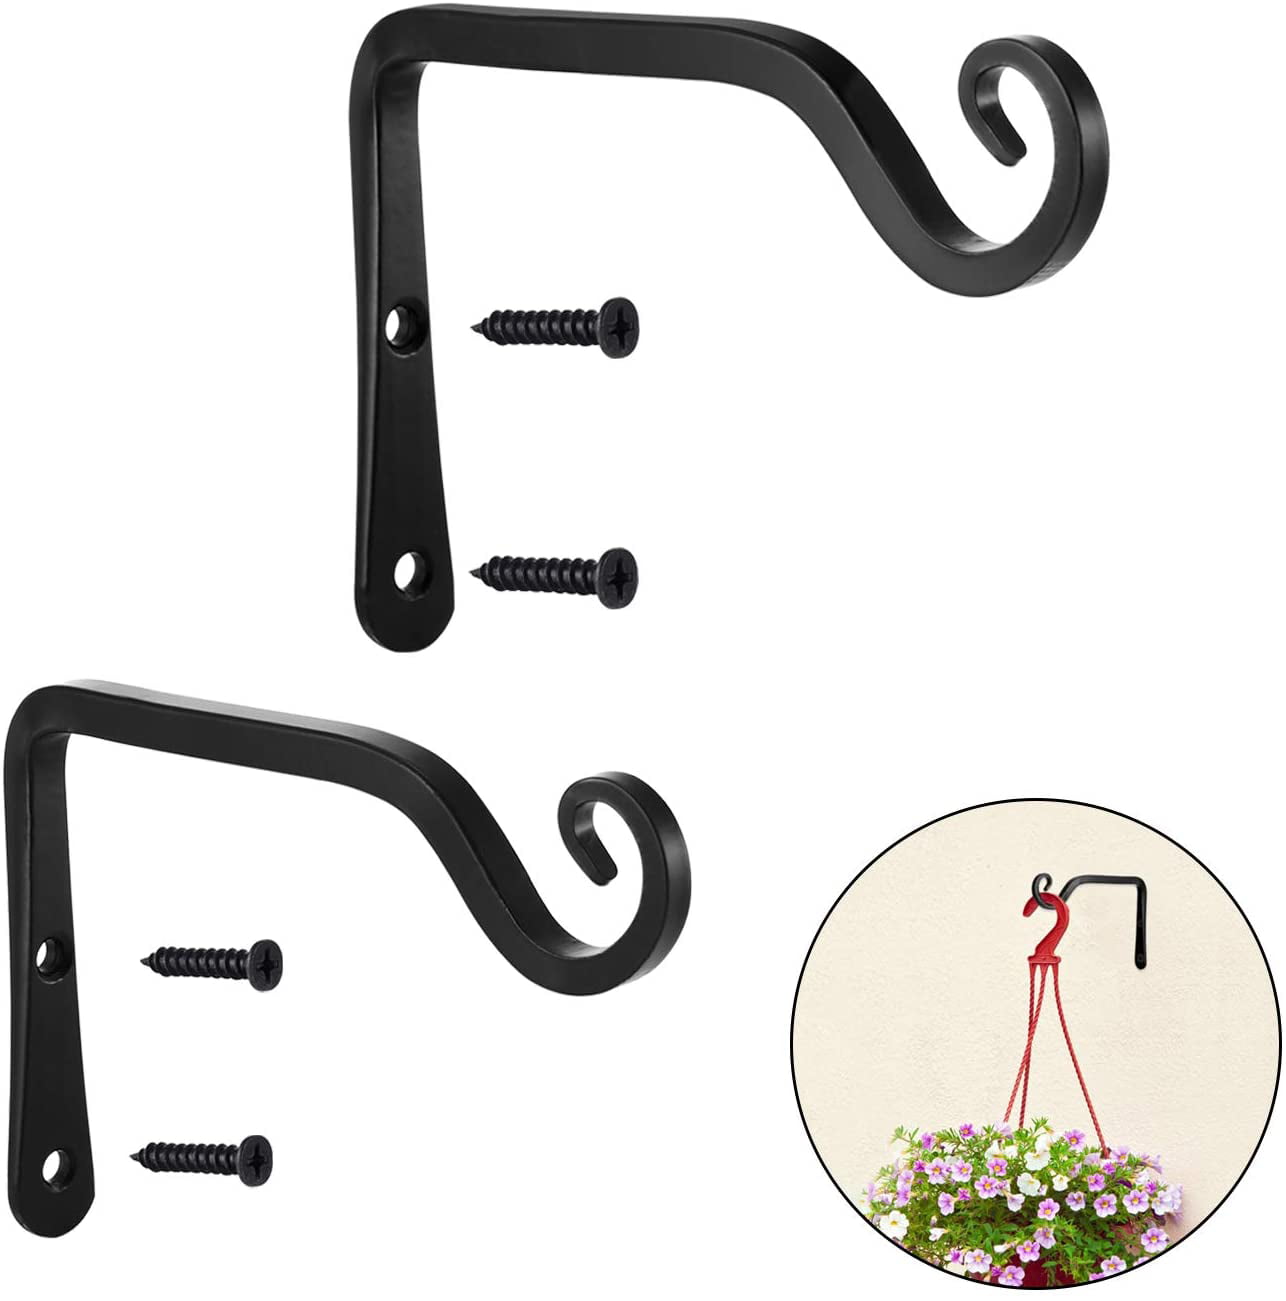 2 Pack, Black Lantern Bird Feeders 6 inch Plant Hook for Wall Wall Hooks for Hanging Plants Wind Chime with Screw POTEY Iron Metal Wall Hook Plant Hanger Bracket 